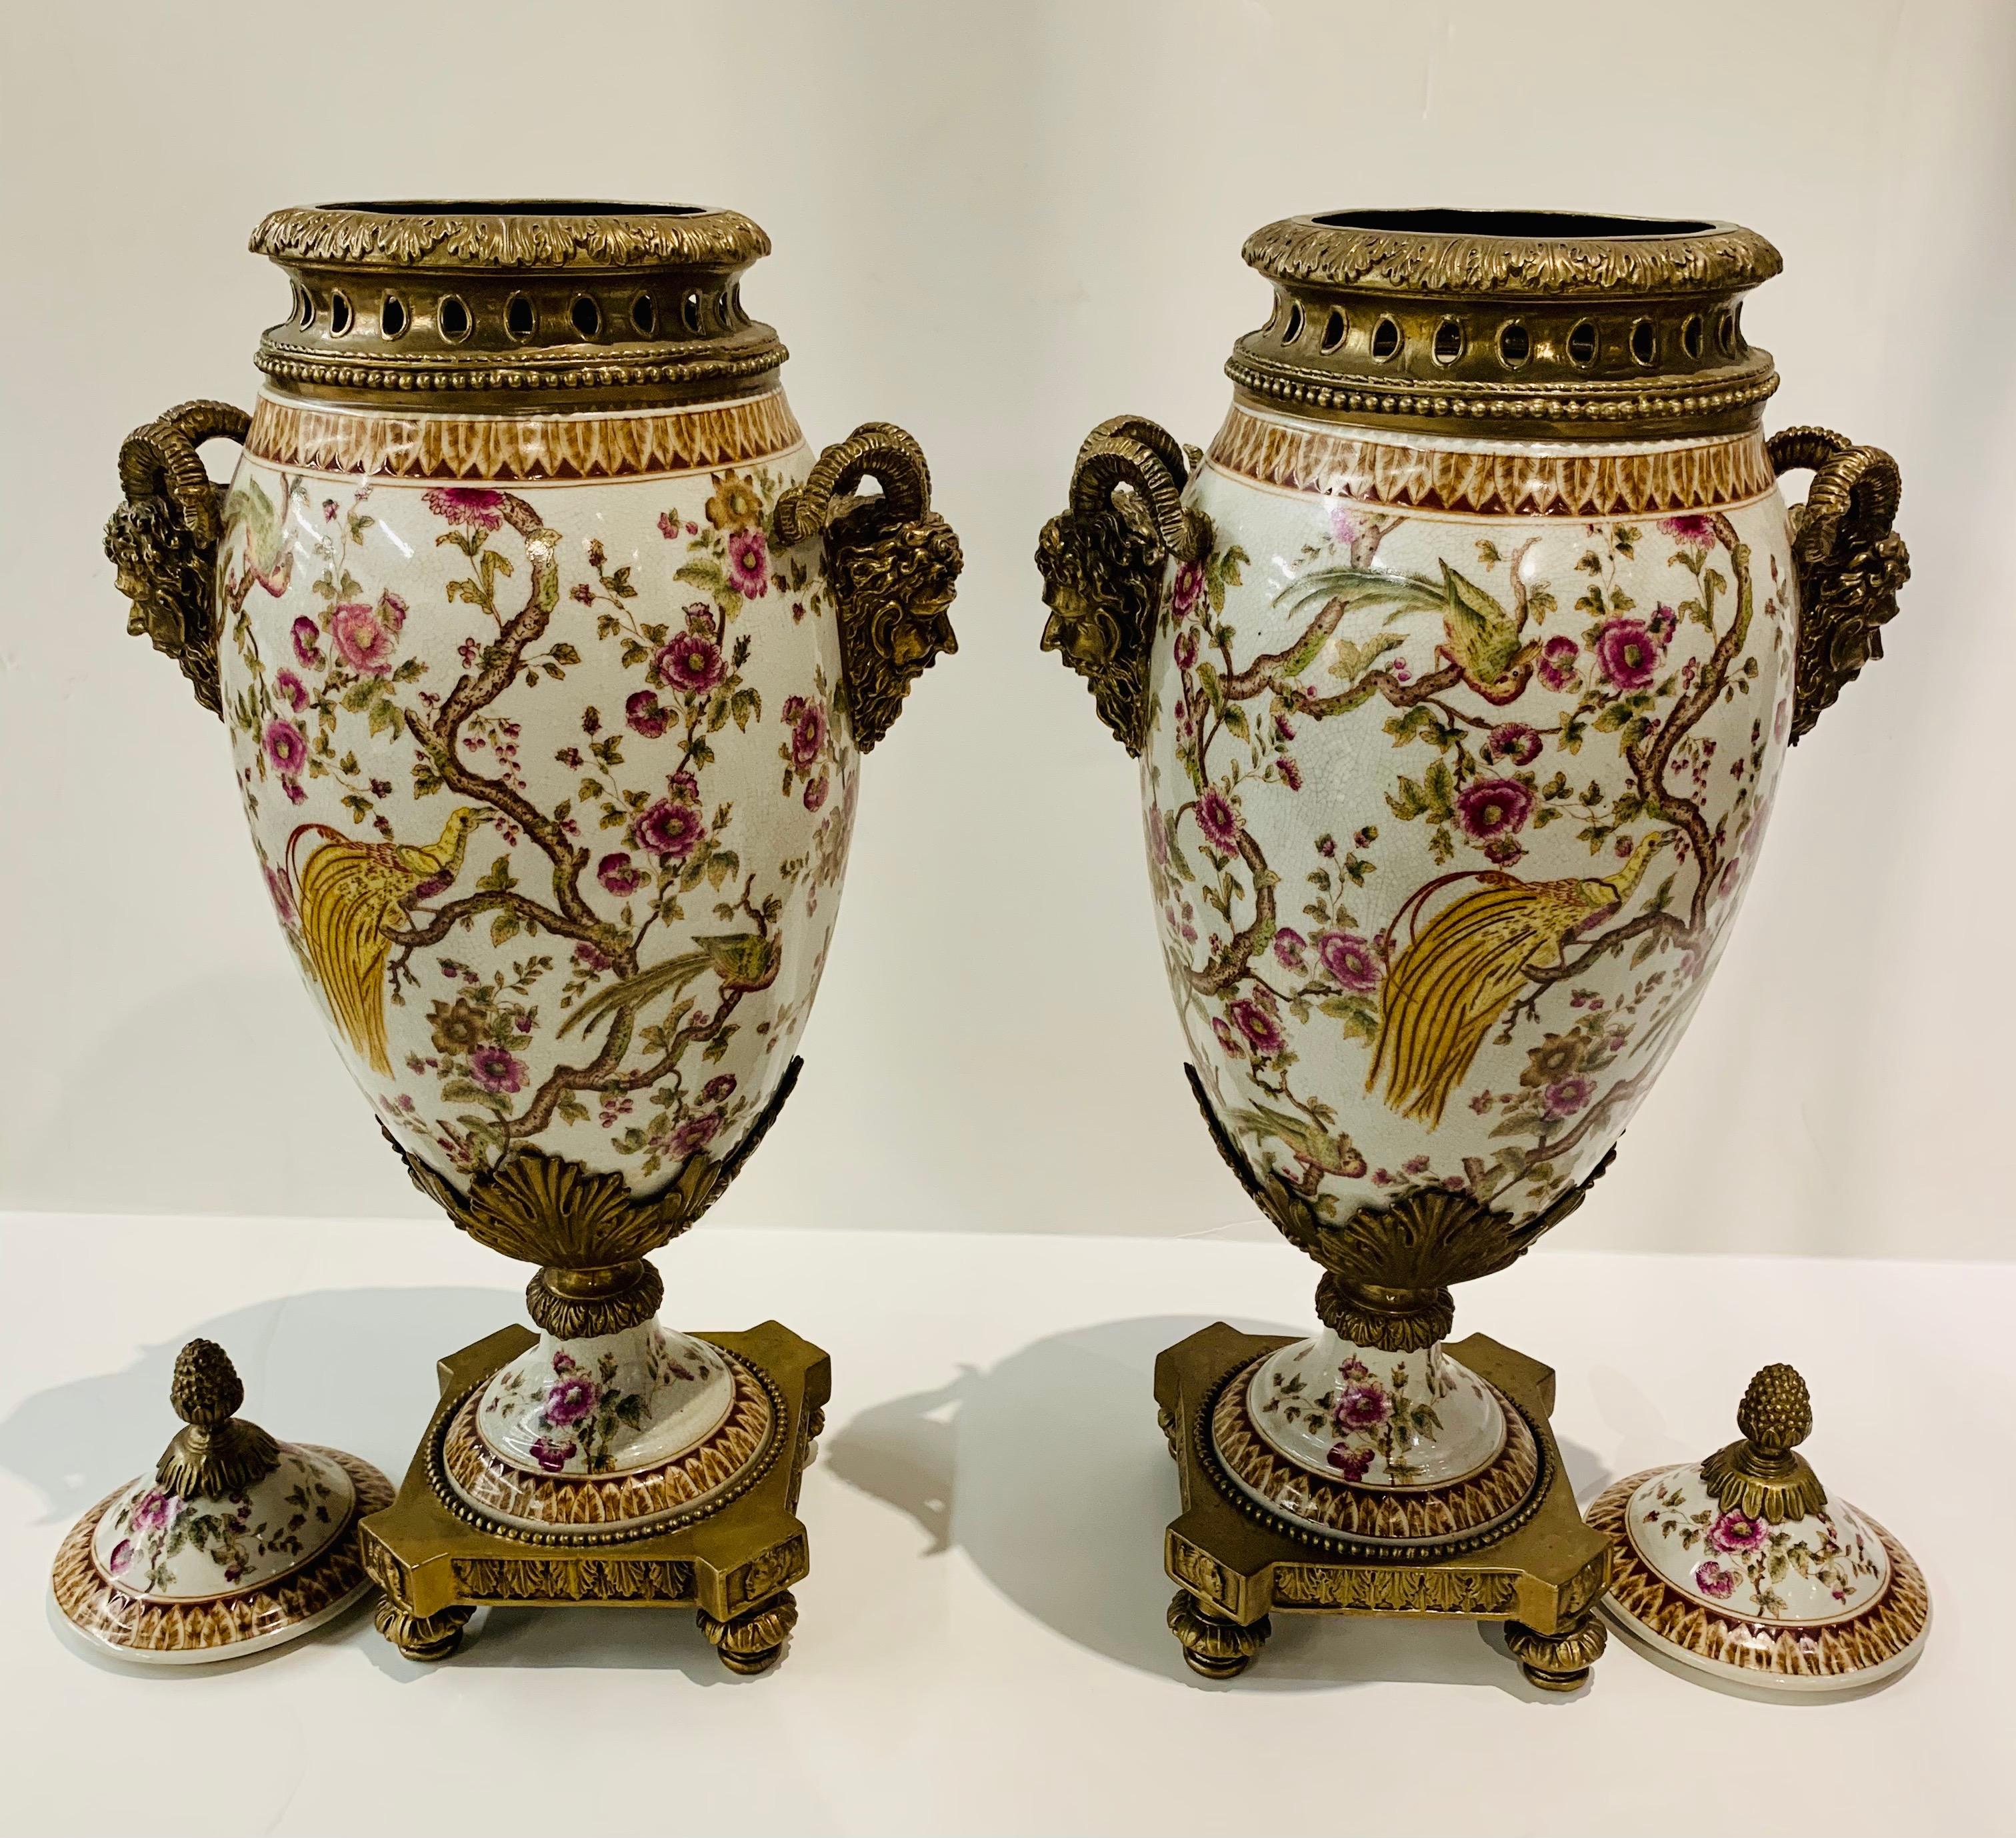 Aesthetic Movement Porcelain and Bronze Covered Urns with Figural Ram’s Head Handles